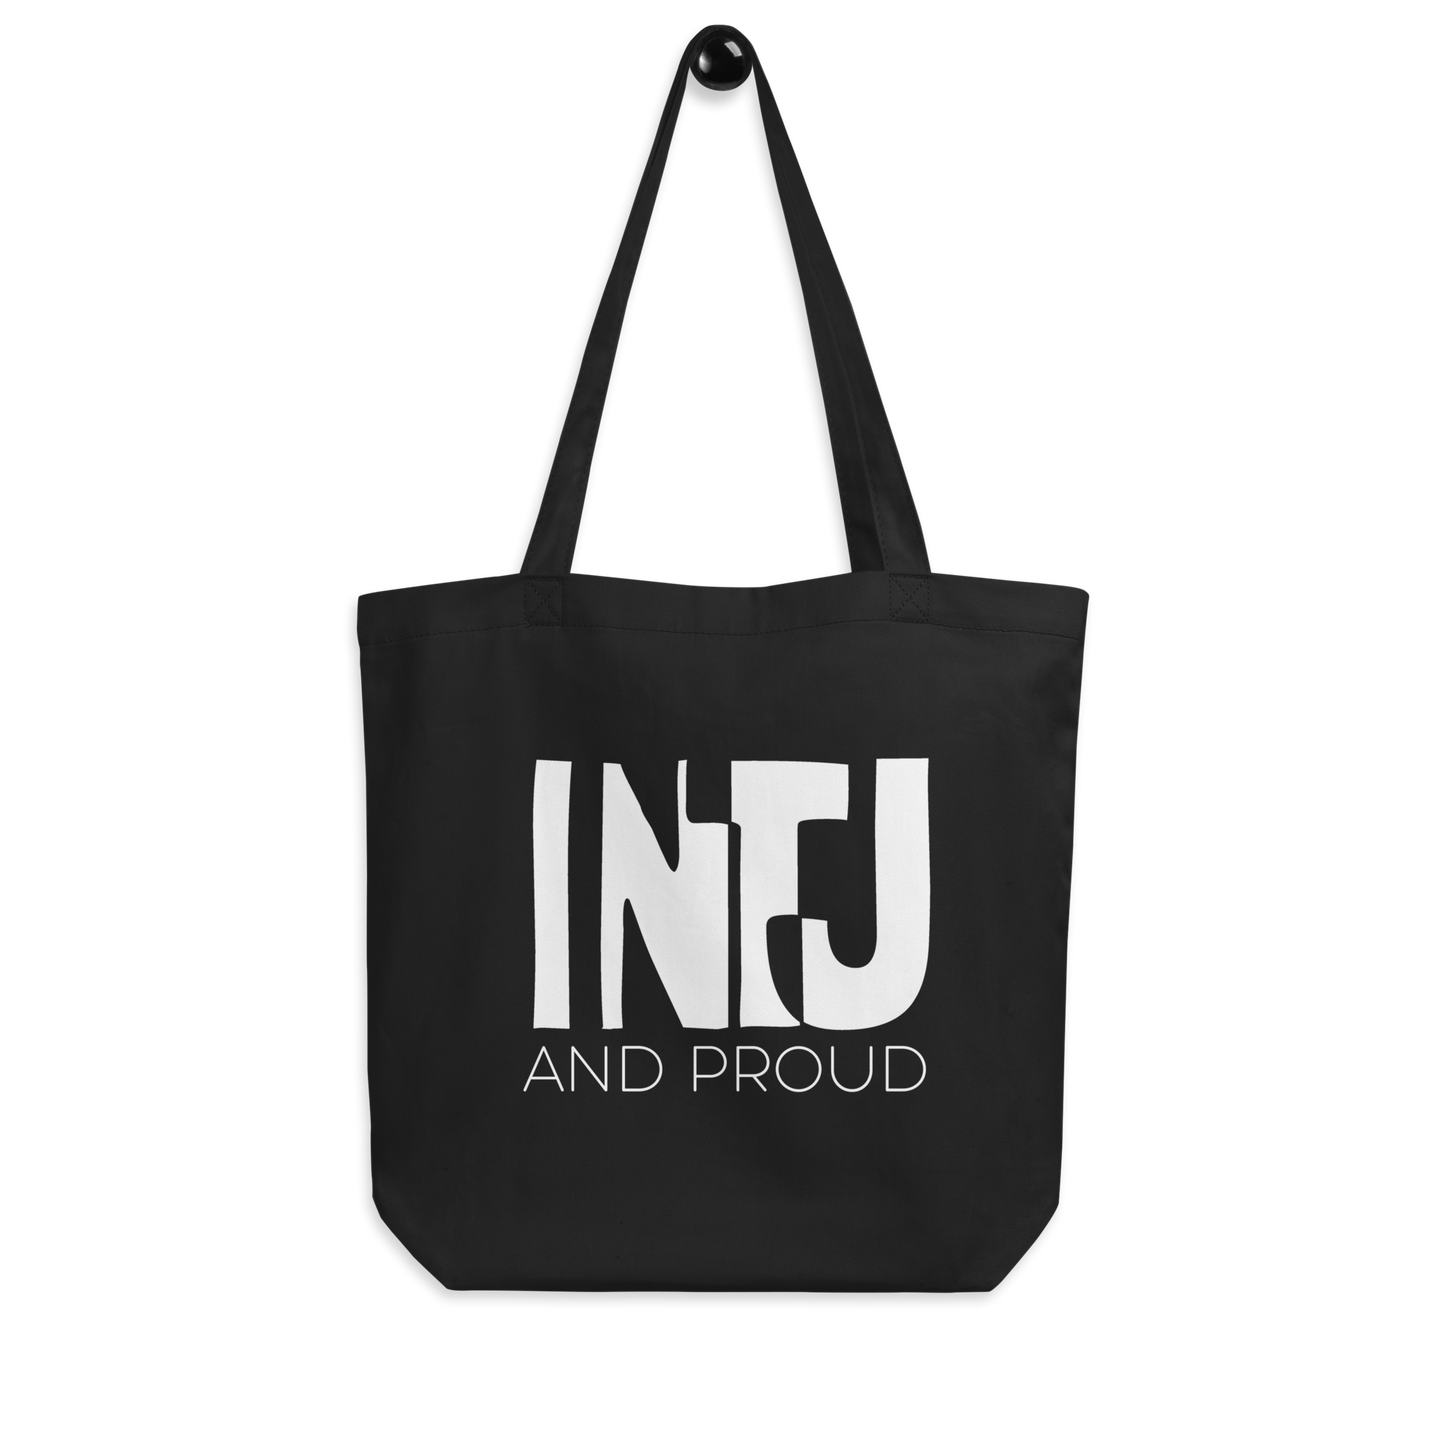 INTJ and Proud Tote